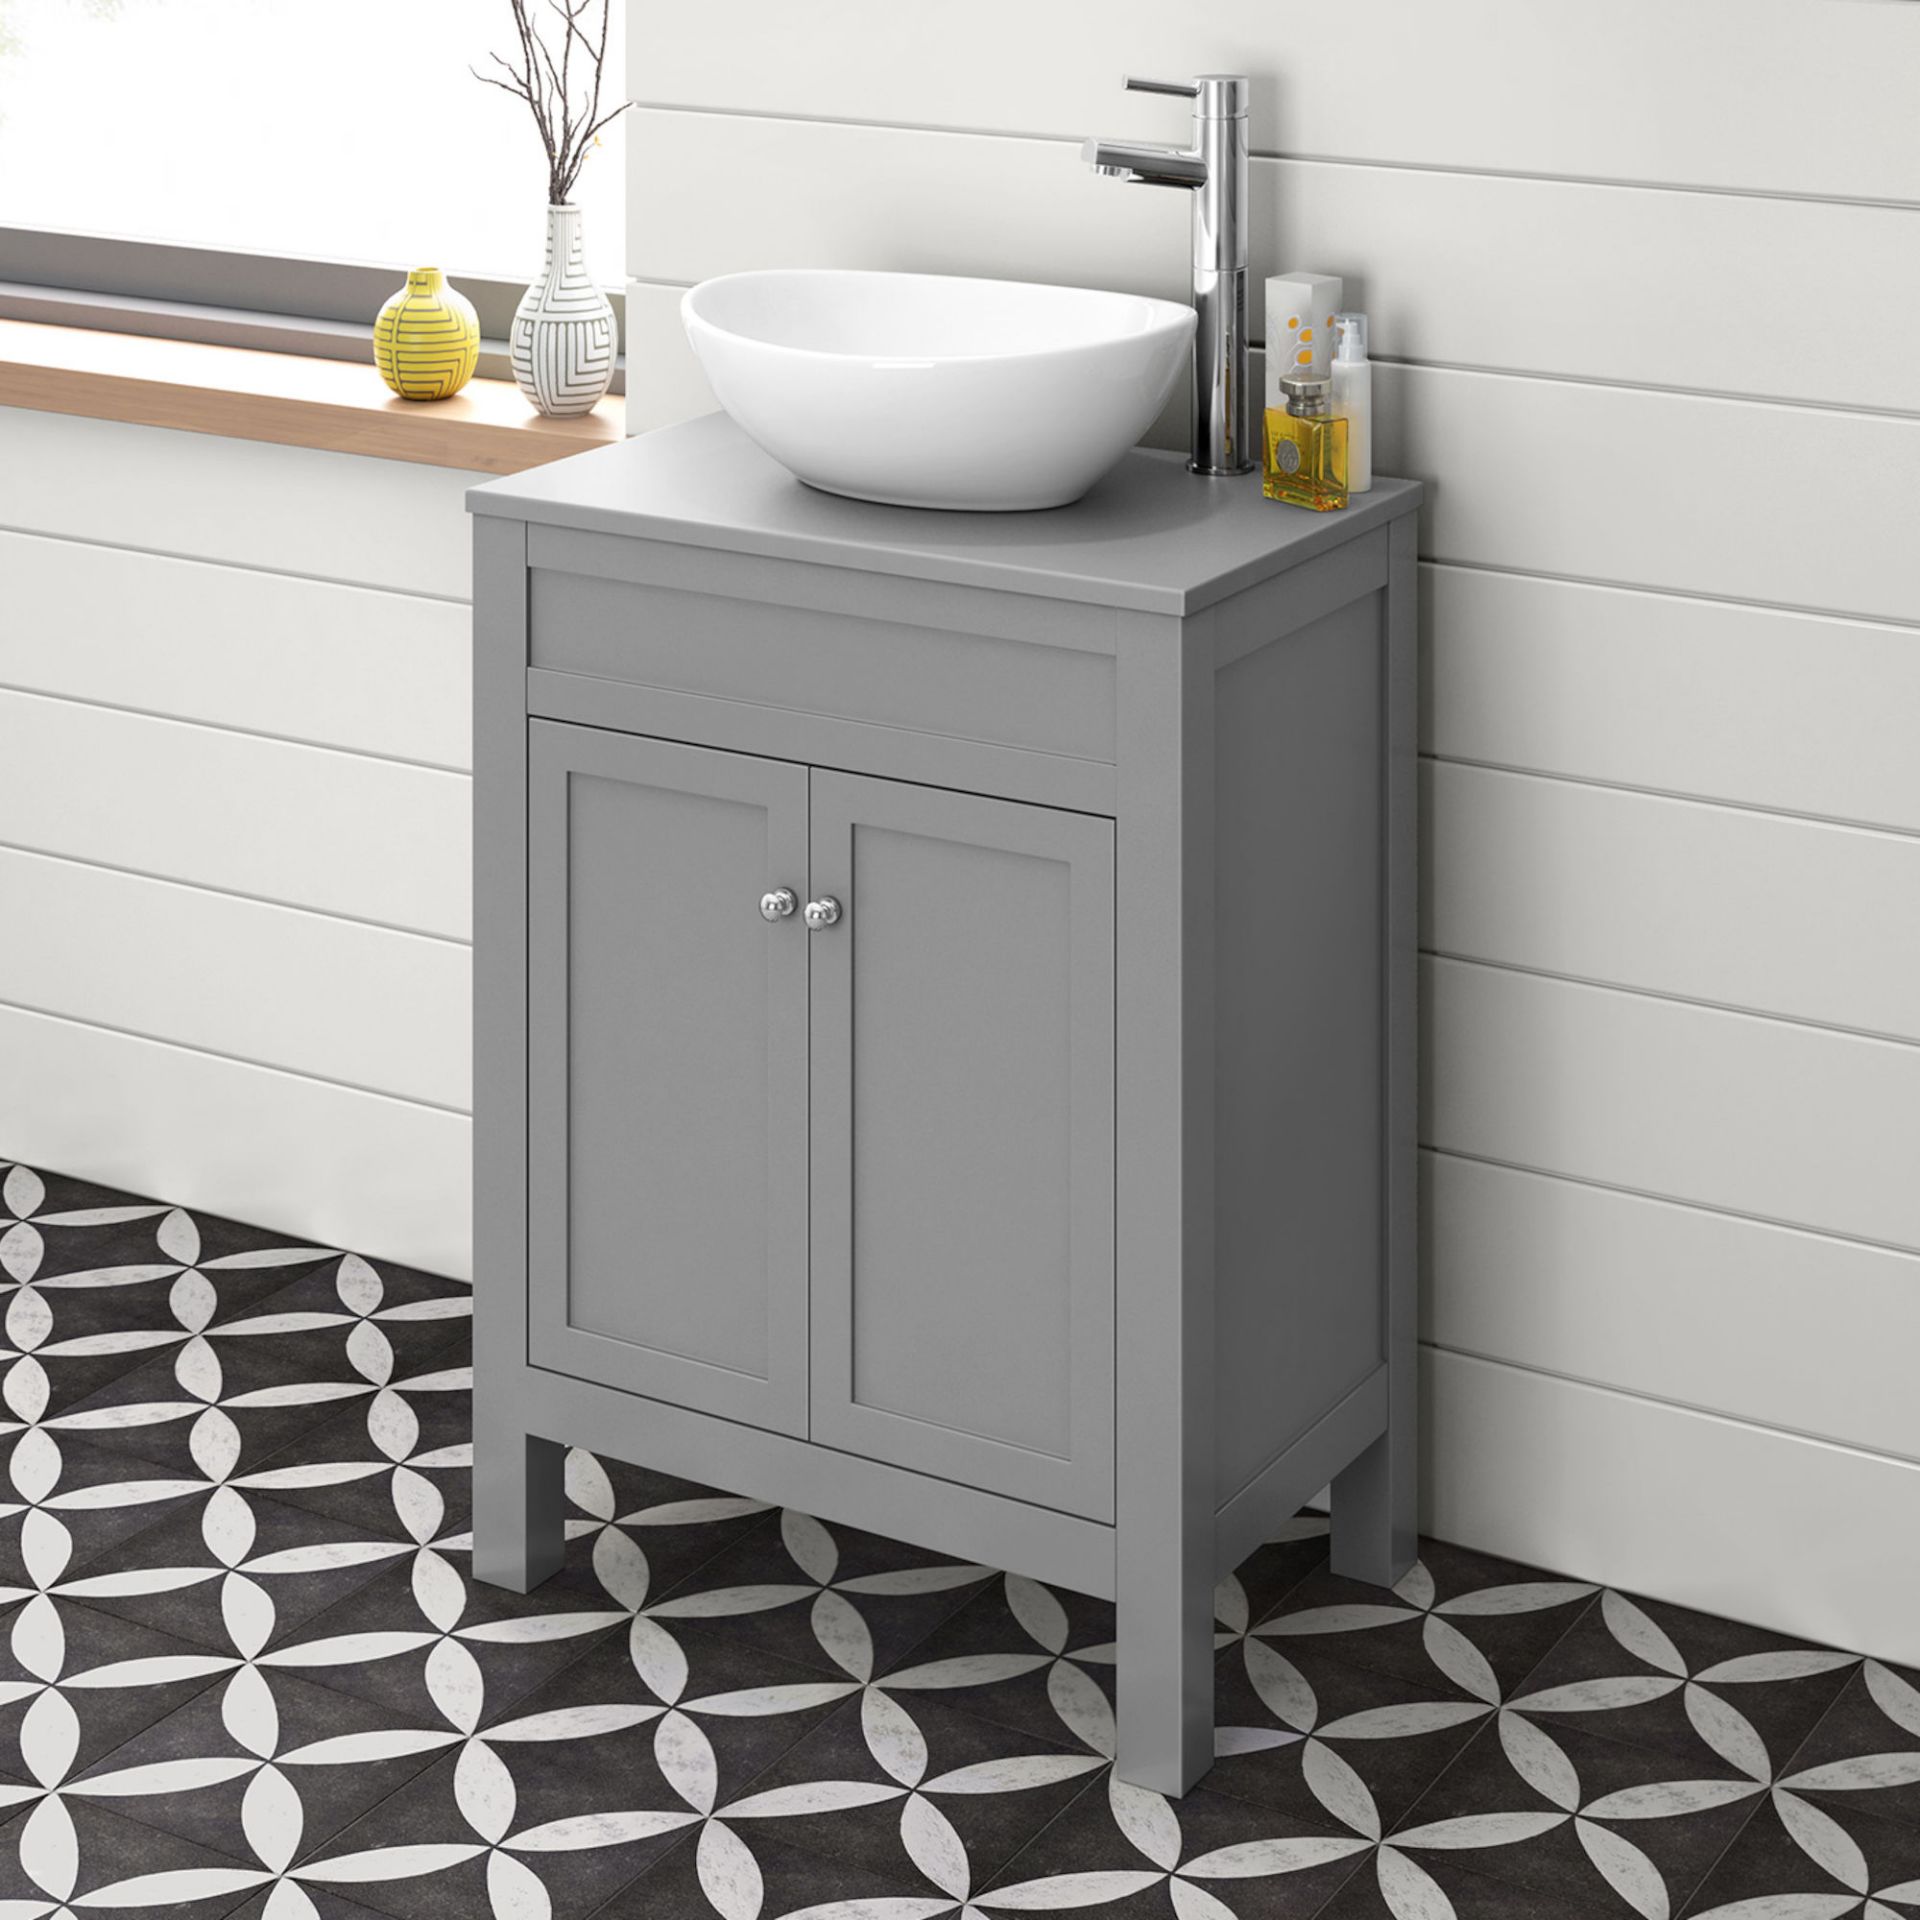 (KL87) 600mm Melbourne Grey Countertop Unit and Camila Basin - Floor Standing. RRP £499.99. Comes